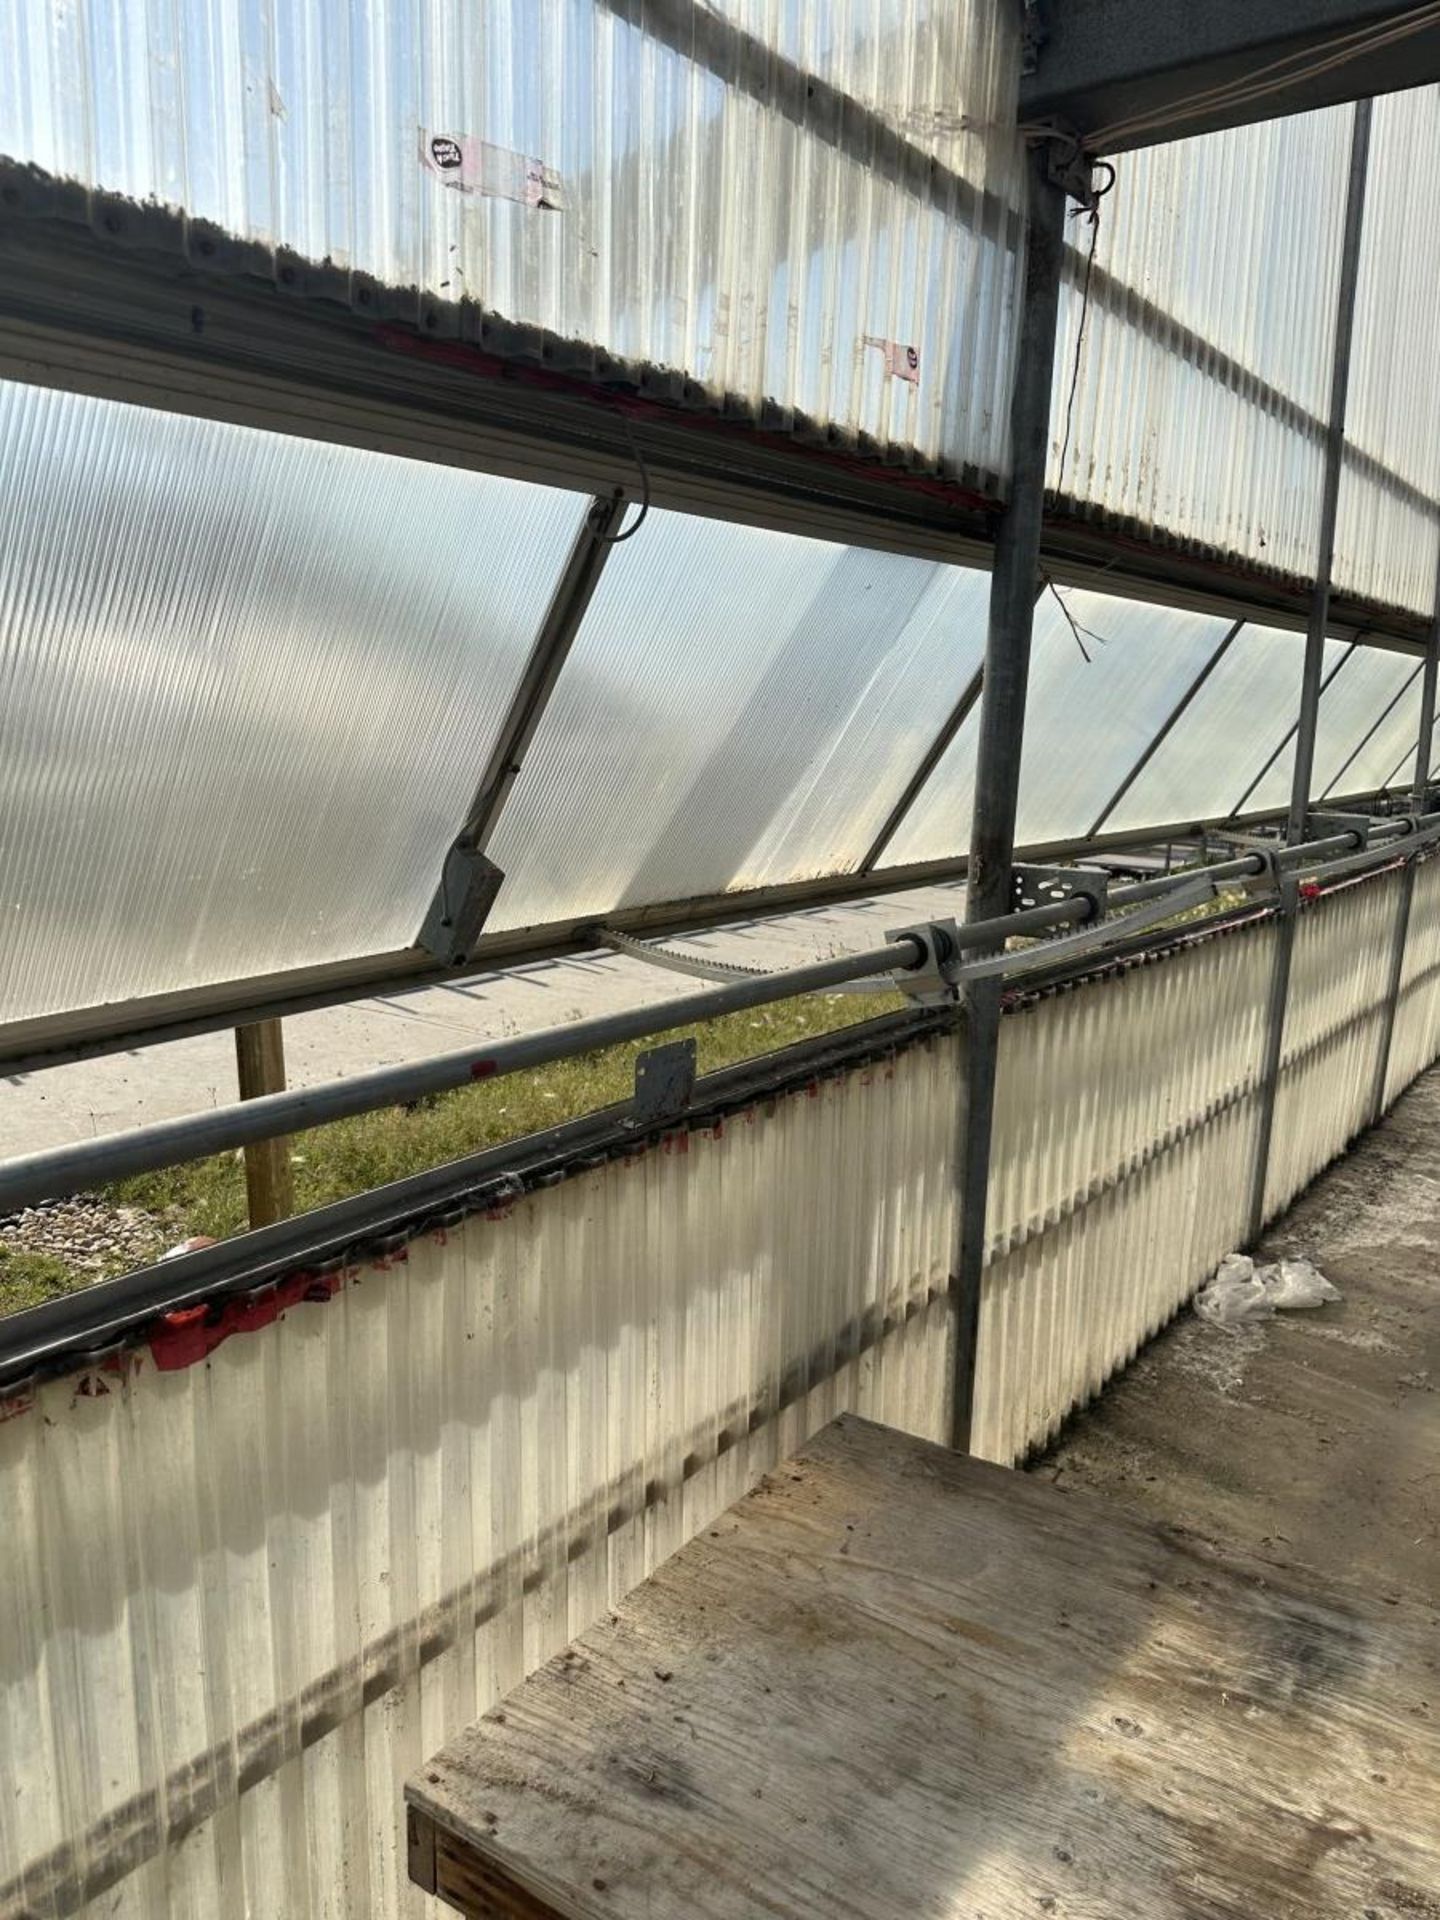 WESTBROOK GUTTER CONNECT 2-BAY GREENHOUSE 60FT X 144FT X 96” H & 2-BAY 60FT X 72 FT X 96”, INCLUDING - Image 66 of 95